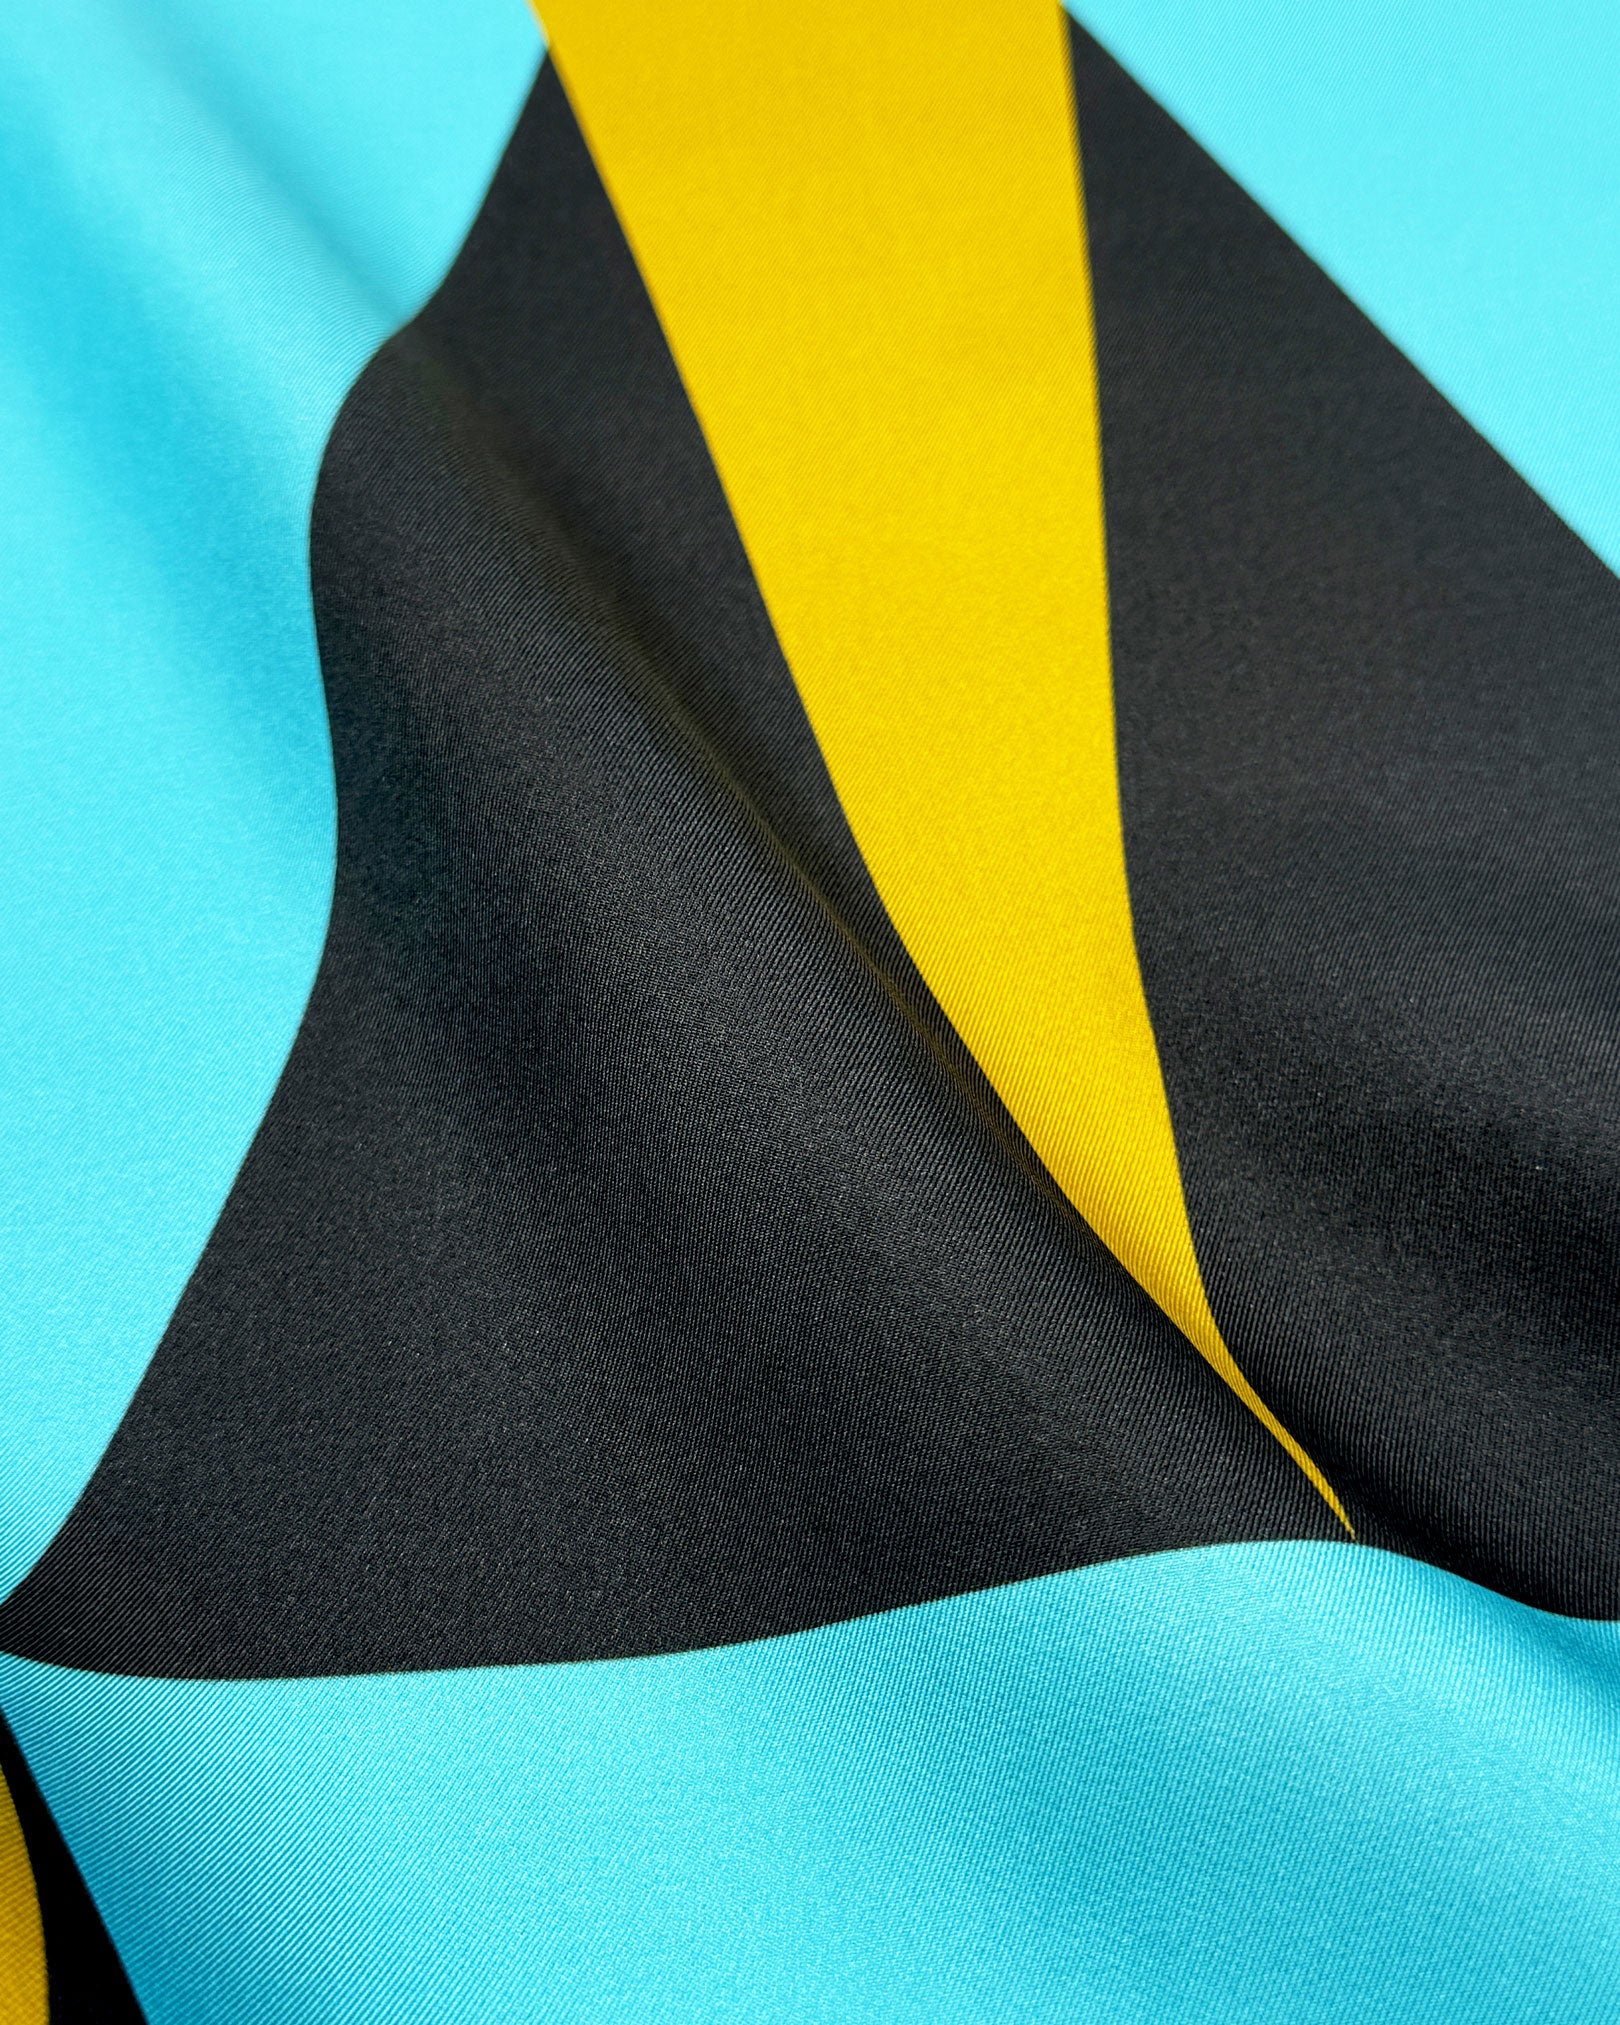 A ruffled close-up of the 'Leipzig' silk neckerchief, presenting a closer view of the interplay of blue, grey and yellow triangles.